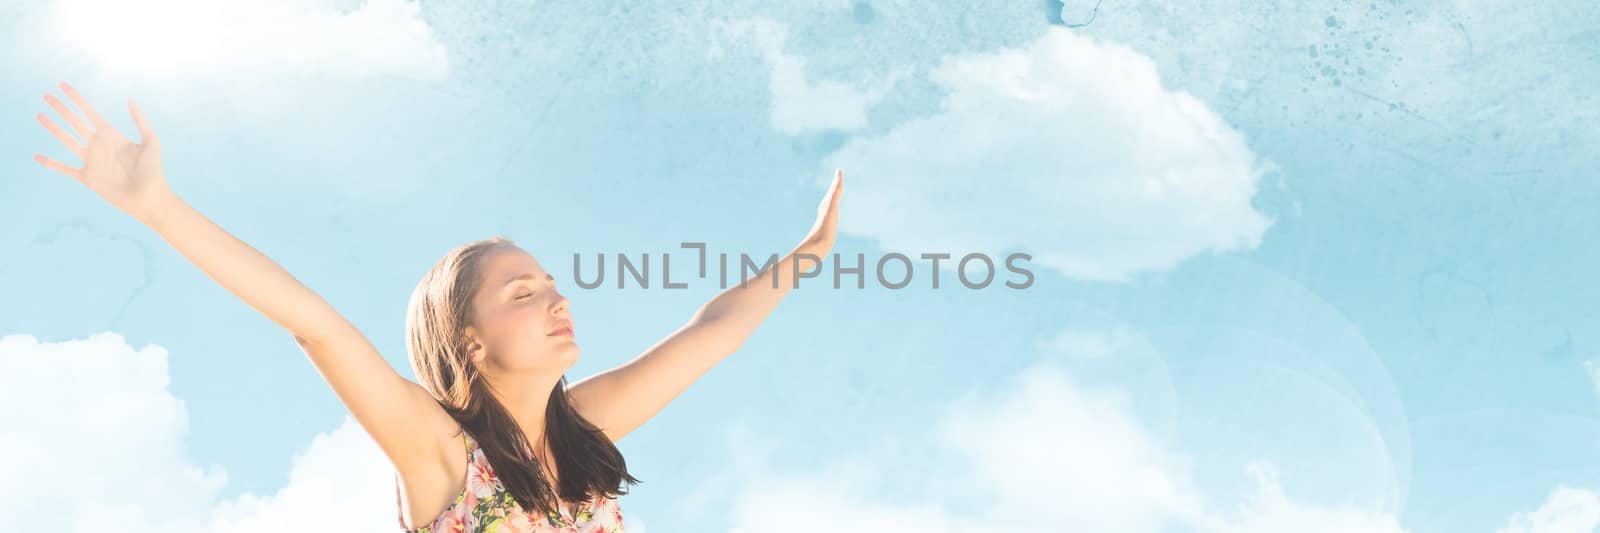 Digital composite of Millennial woman arms in air against Summer sky with flare